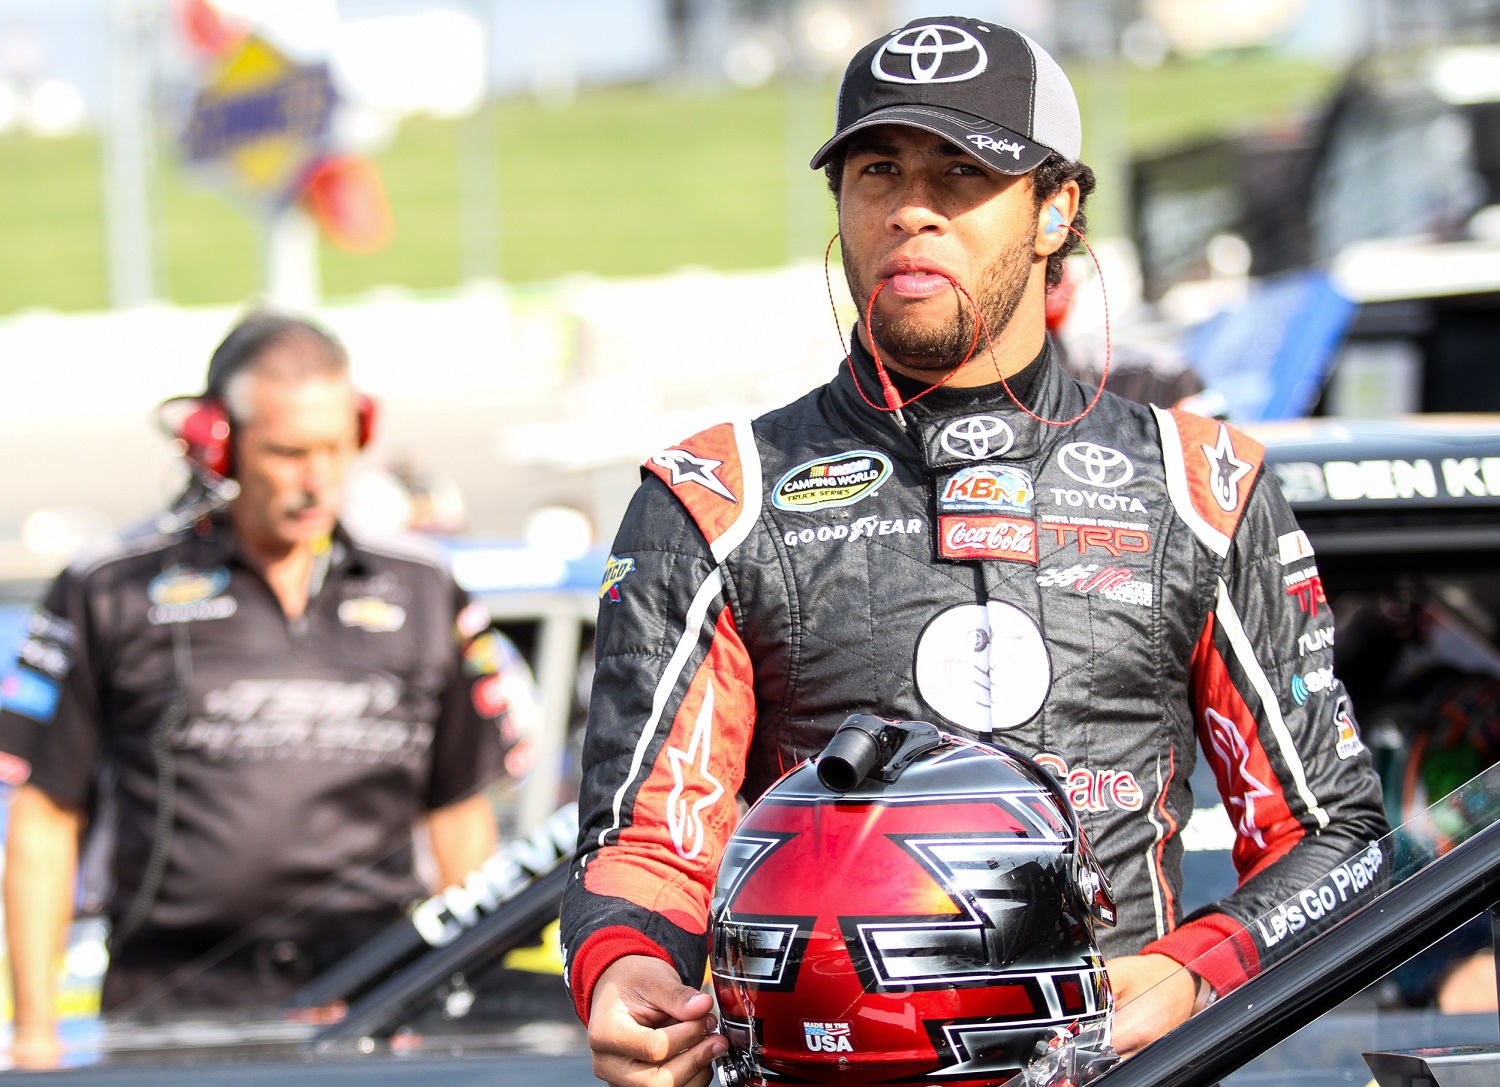 Bubba Wallace at practice for the NASCAR Camping World Truck Series American Ethanol 200 at Iowa Speedway.